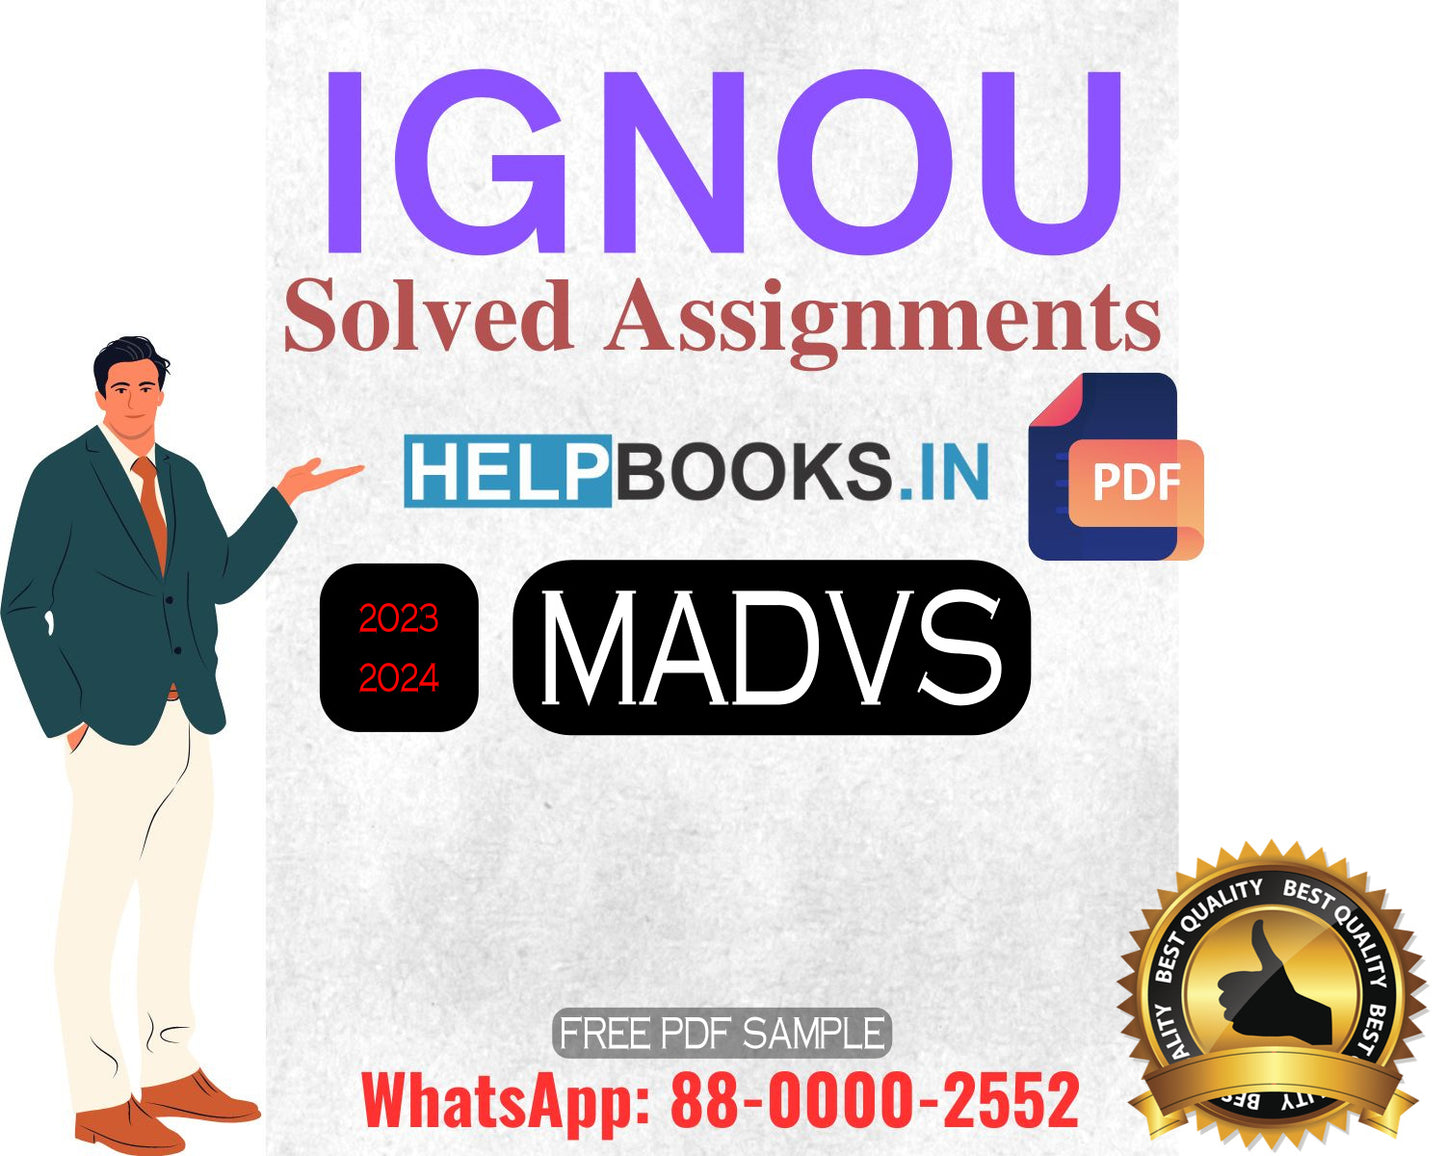 IGNOU Master's Degree Programme Latest IGNOU Solved Assignment 2023-24 & 2022-23 Sessions : MADVS Master of Arts Development Studies Solved Assignments